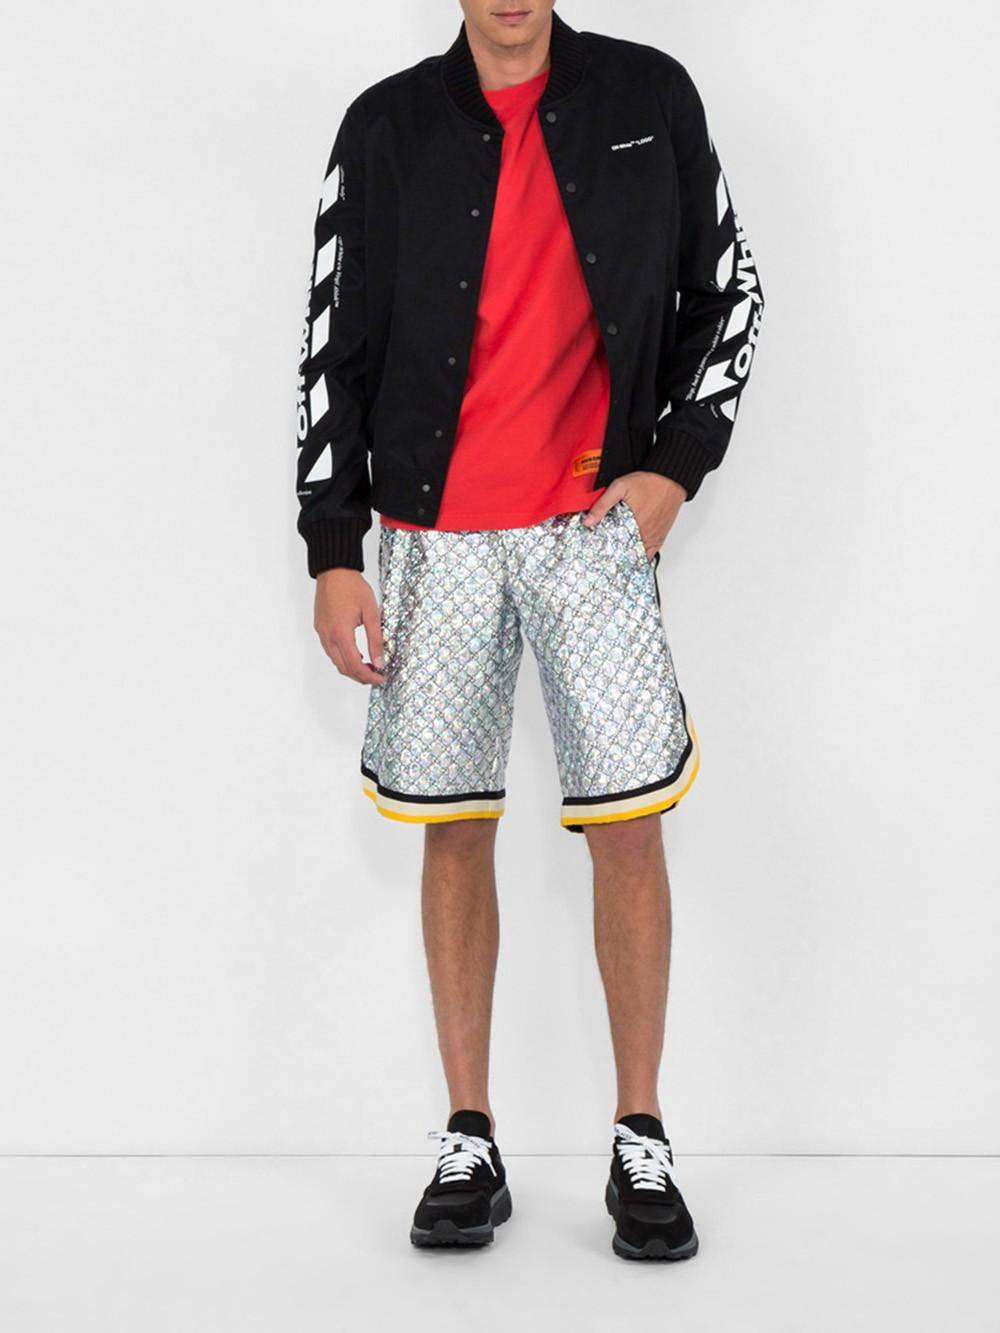 Gucci Silver Basketball Shorts for Men - Lyst